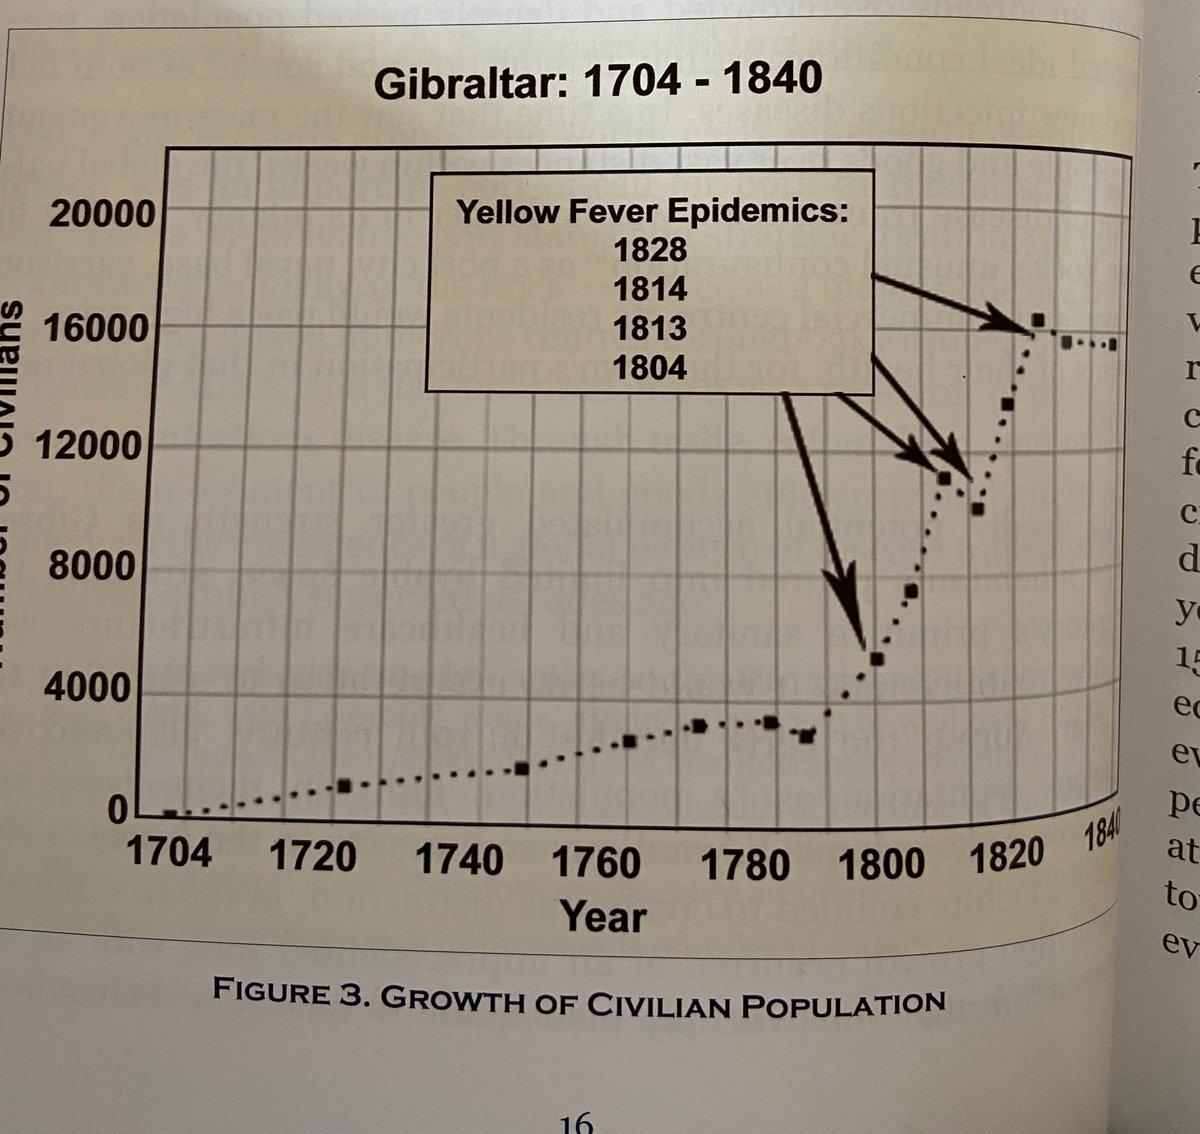 Gibraltar's Population 1704-1840Gib's pop. increased dramatically in the early 1800s. This meant that many poor families lived in overcrowded houses, normally hidden up the rock. The richer, often military personnel, lived in the spacious South District. (2/17)